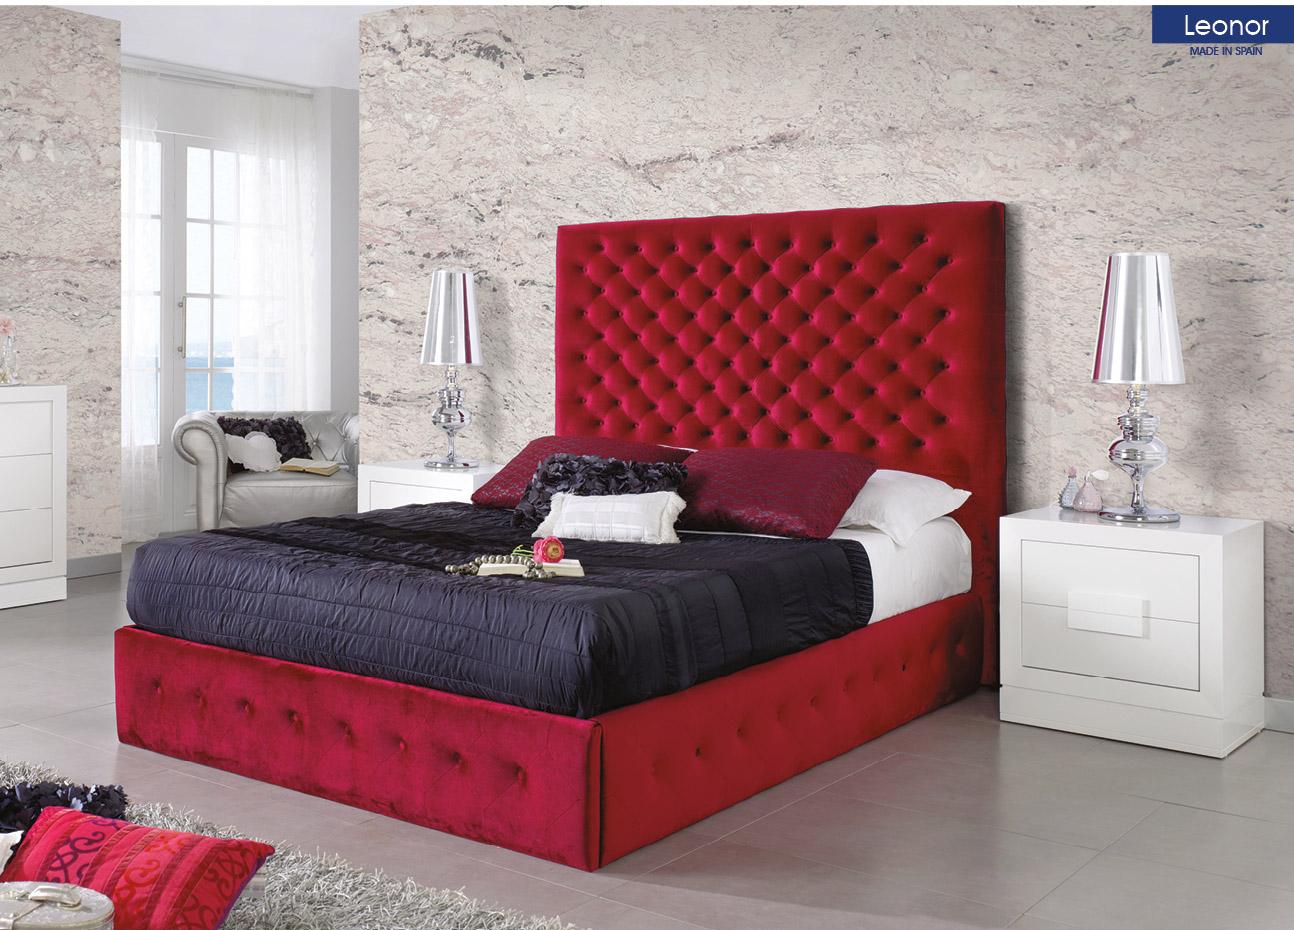 

    
Queen Storage Bedroom Set 3 Leonor Burgundy Contemporary Made in Spain ESF Dupen
